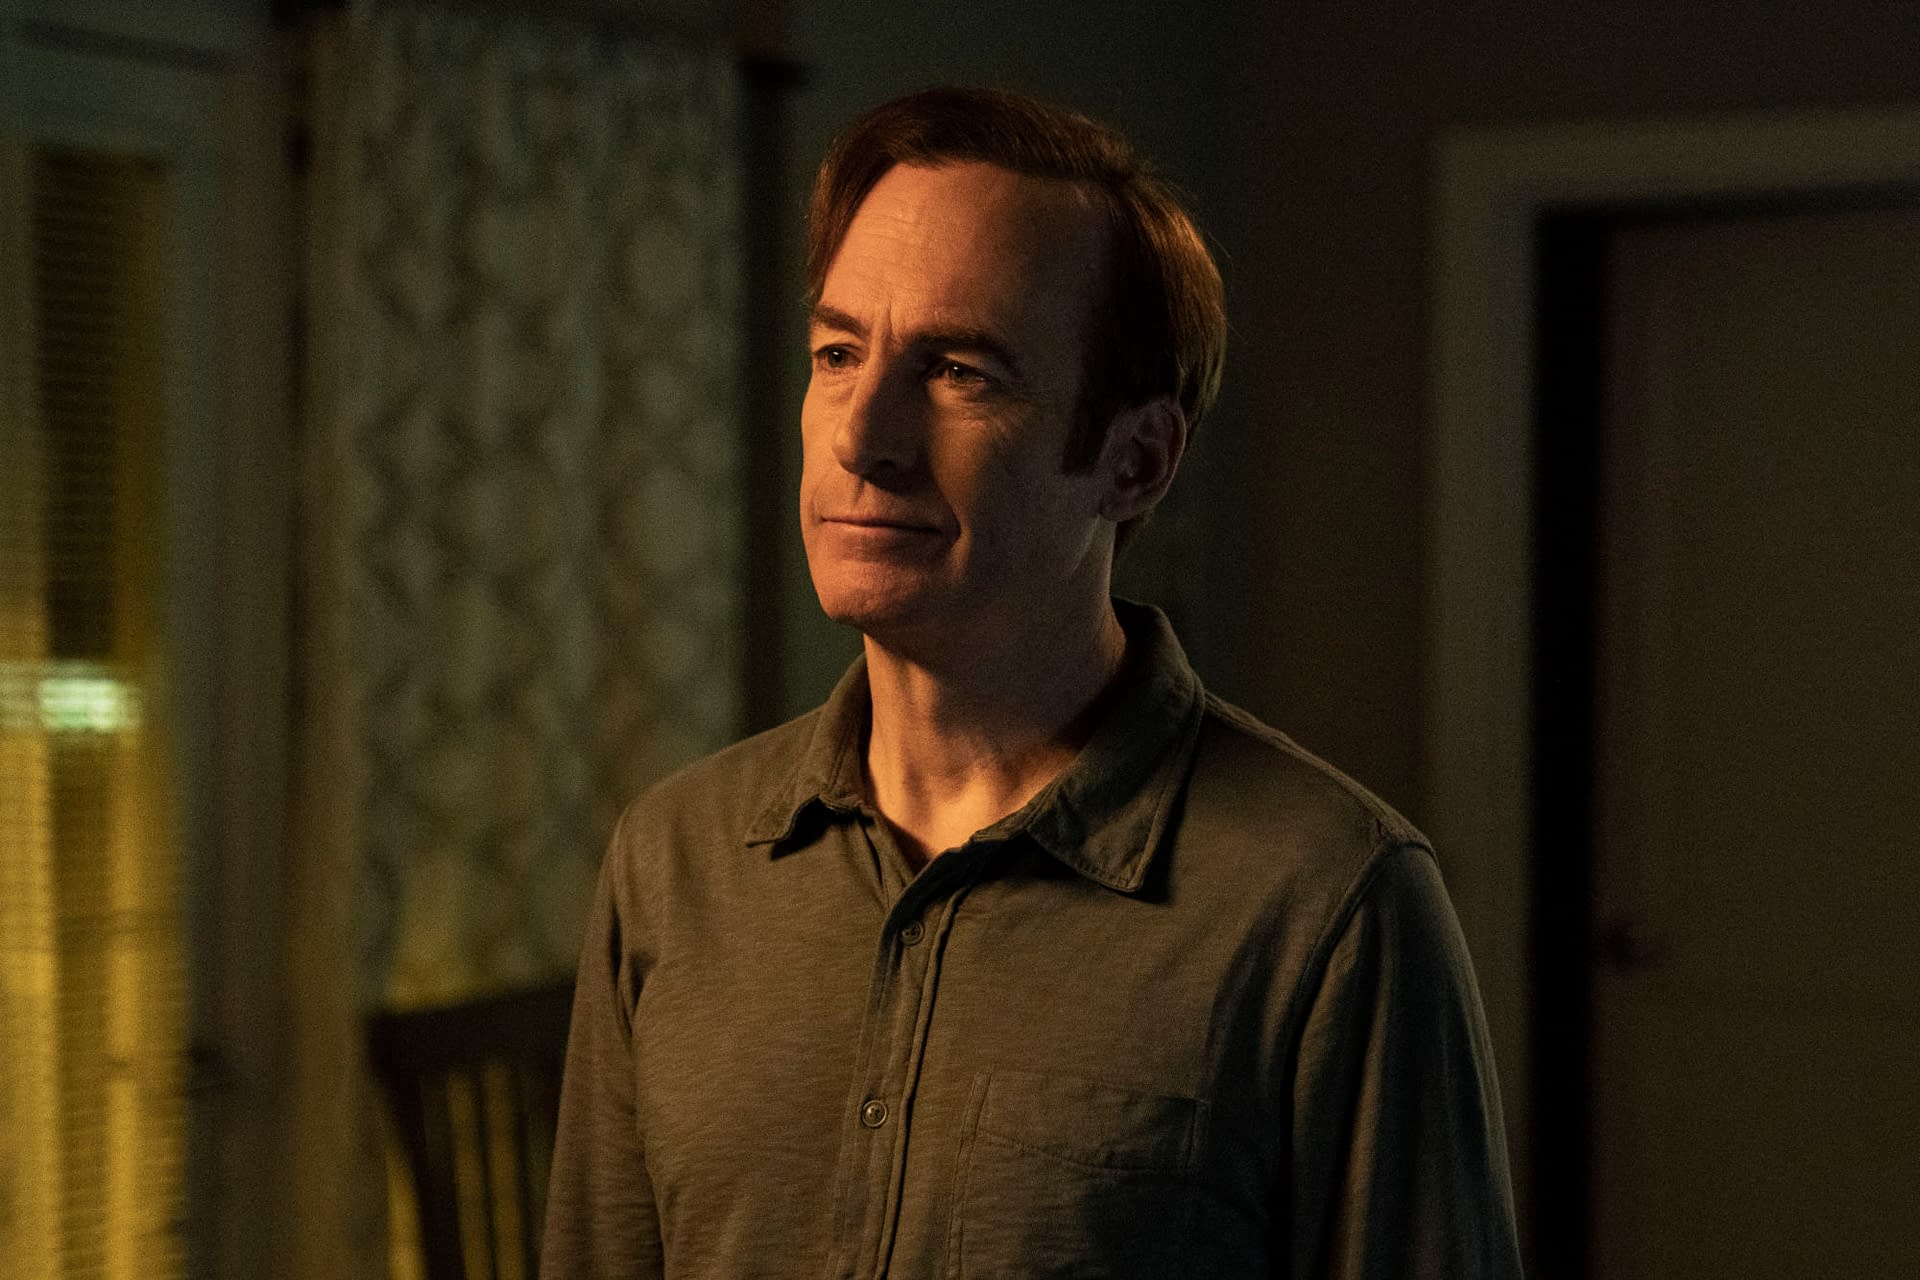 Better Call Saul Shares S06 Part 1 Finale Plan And Execution Preview